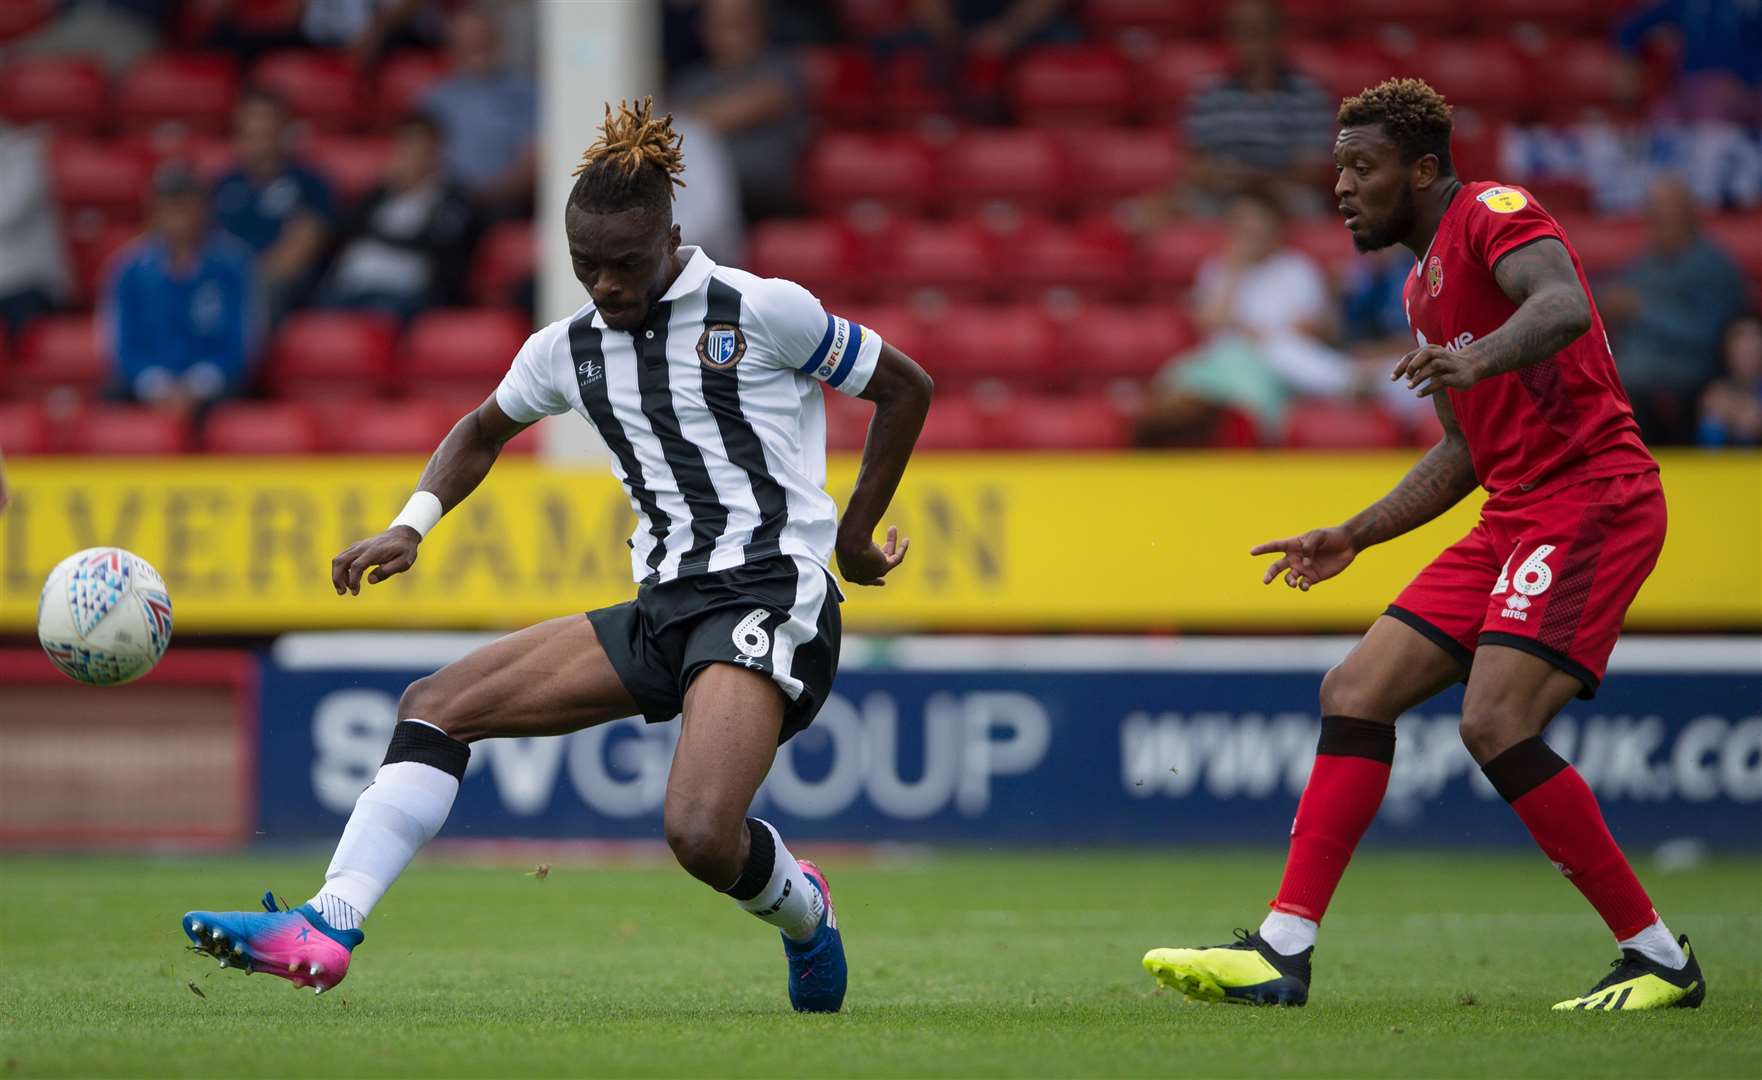 Captain Gabriel Zakuani clears the danger in front of Morgan Ferrier for Gills. Picture: Ady Kerry